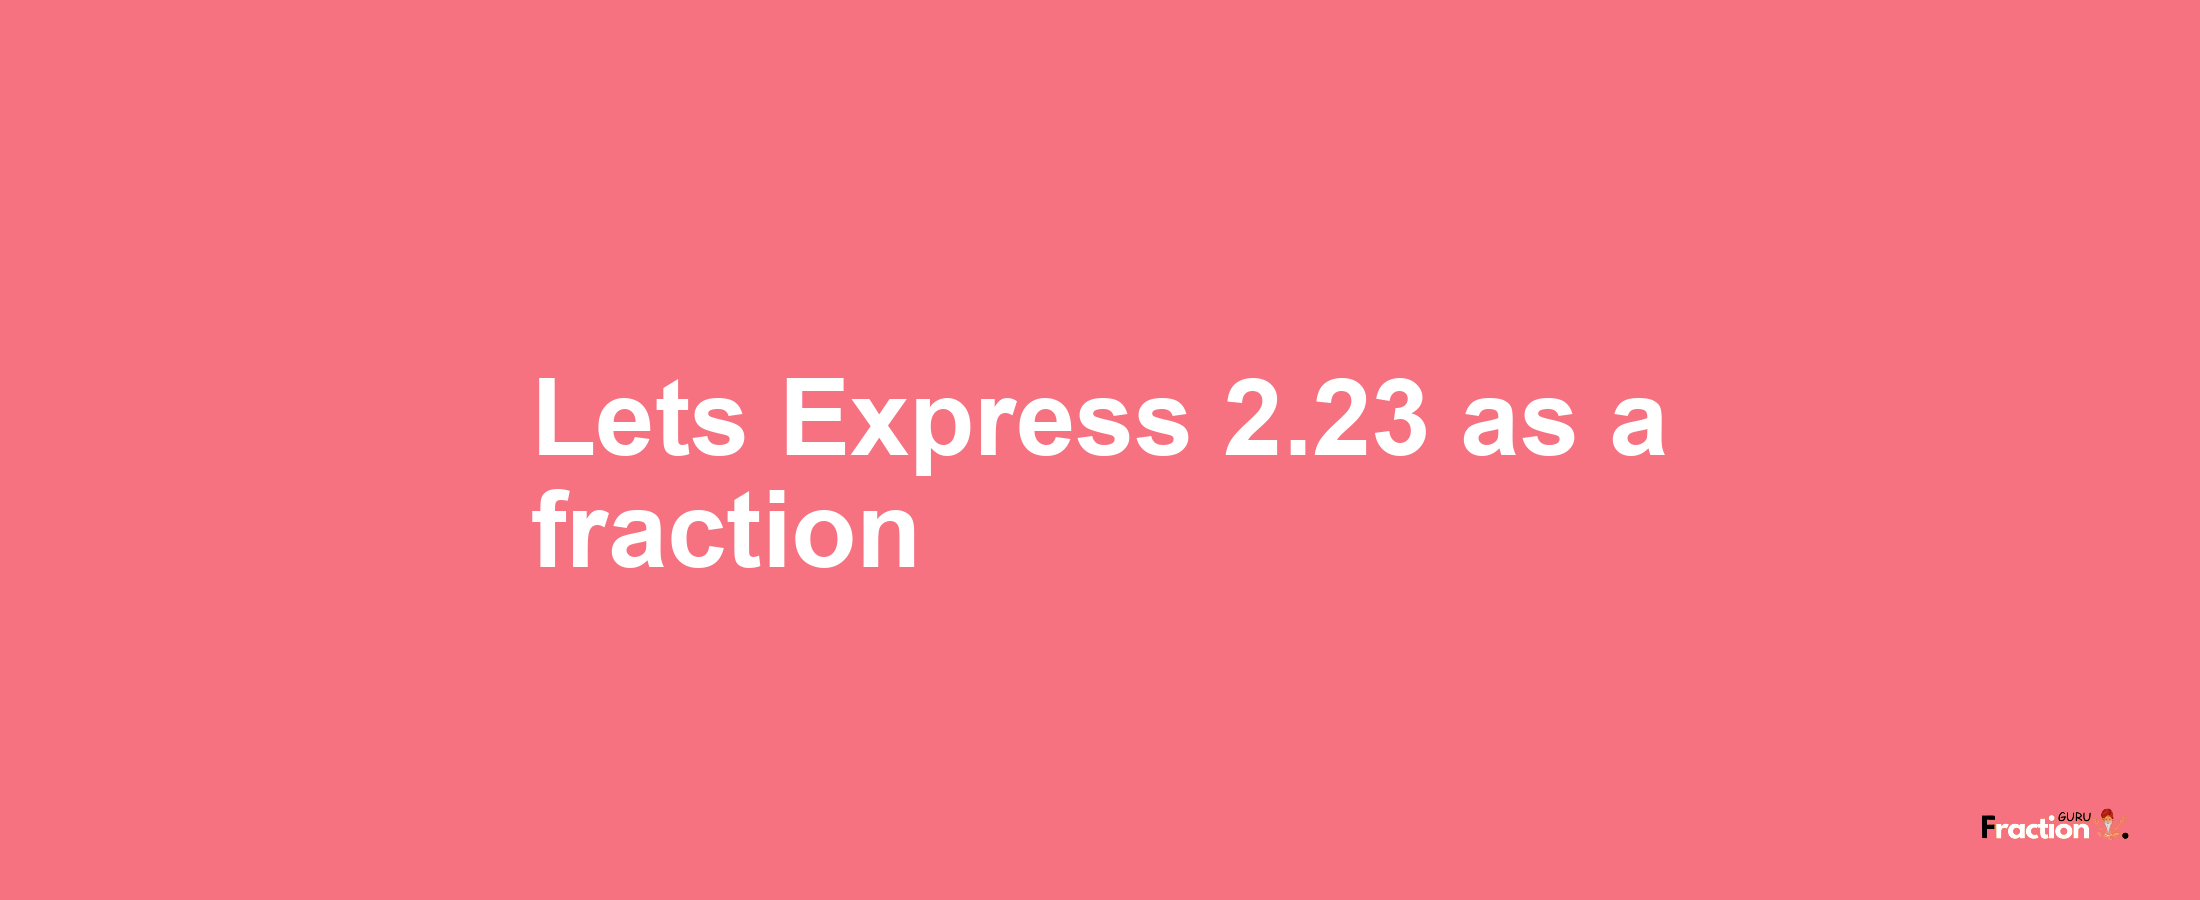 Lets Express 2.23 as afraction